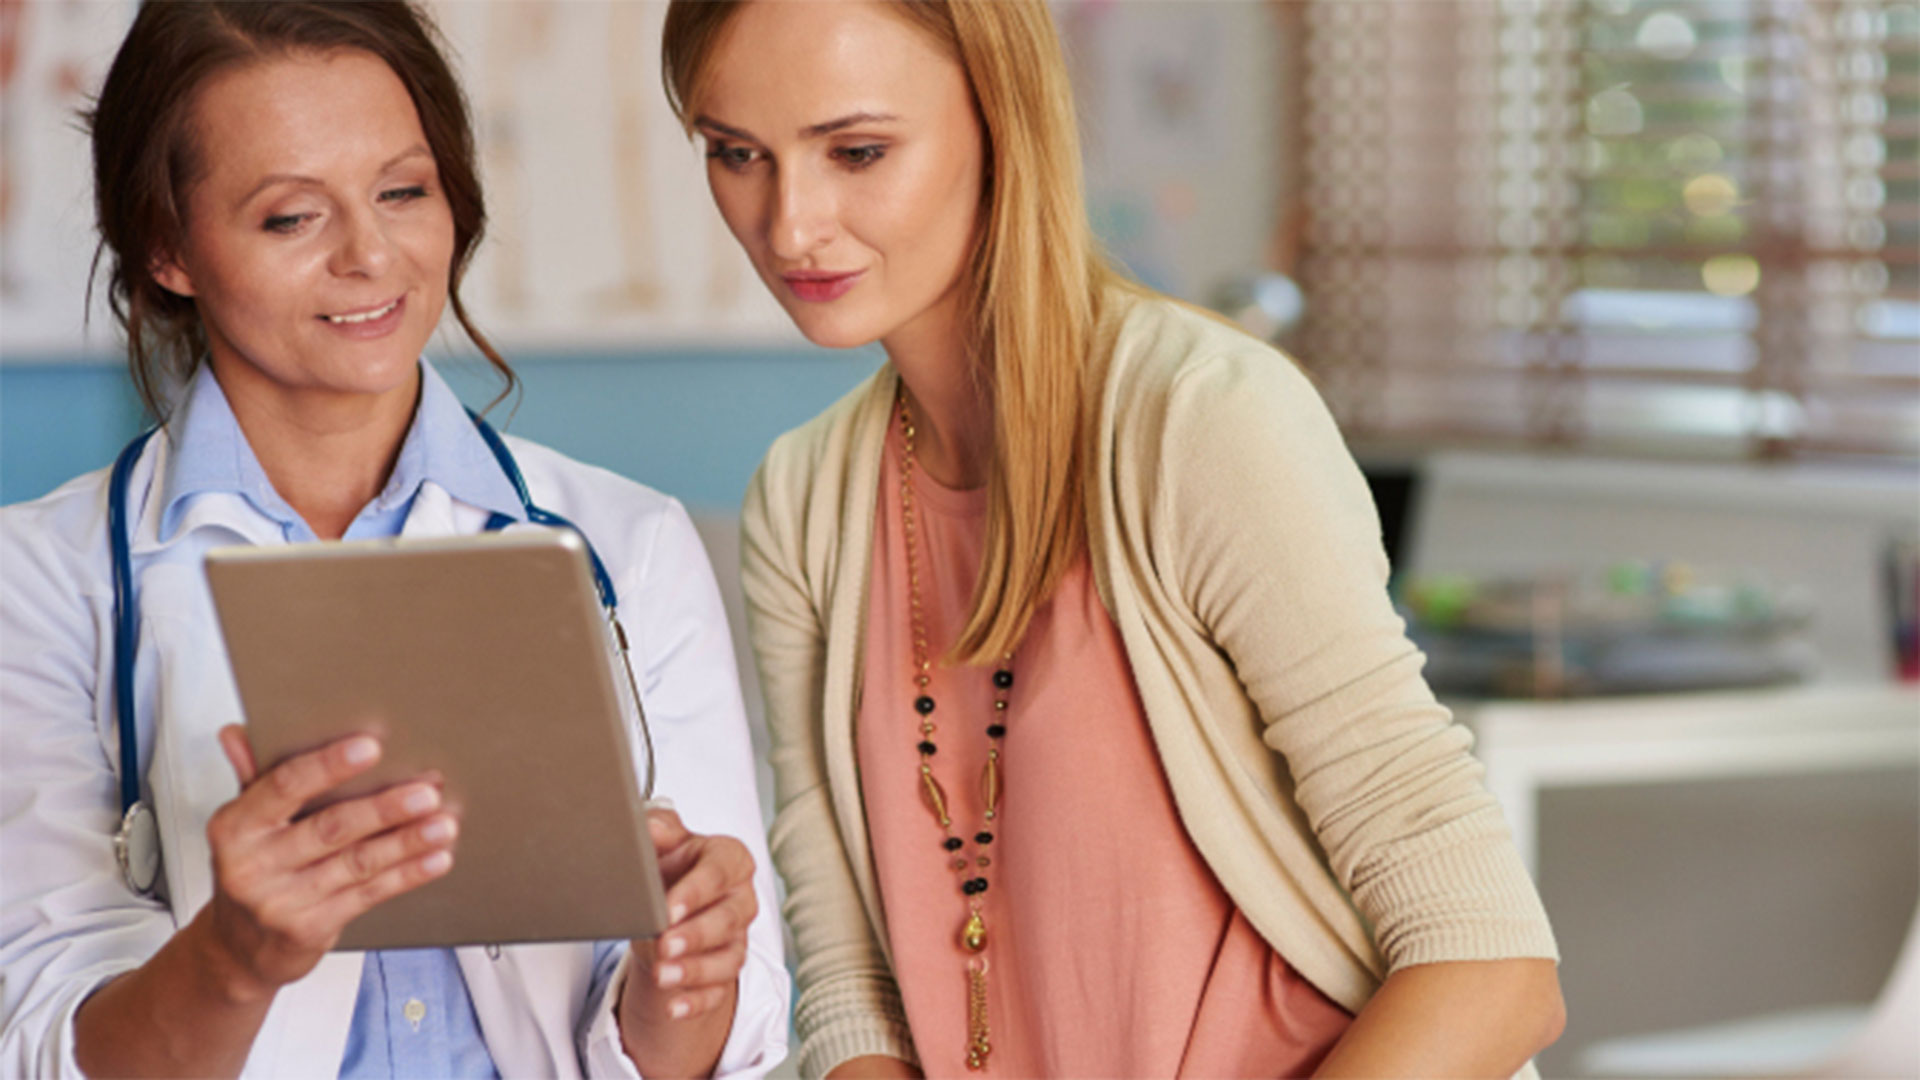 Woman doctor and patient looking at iPad